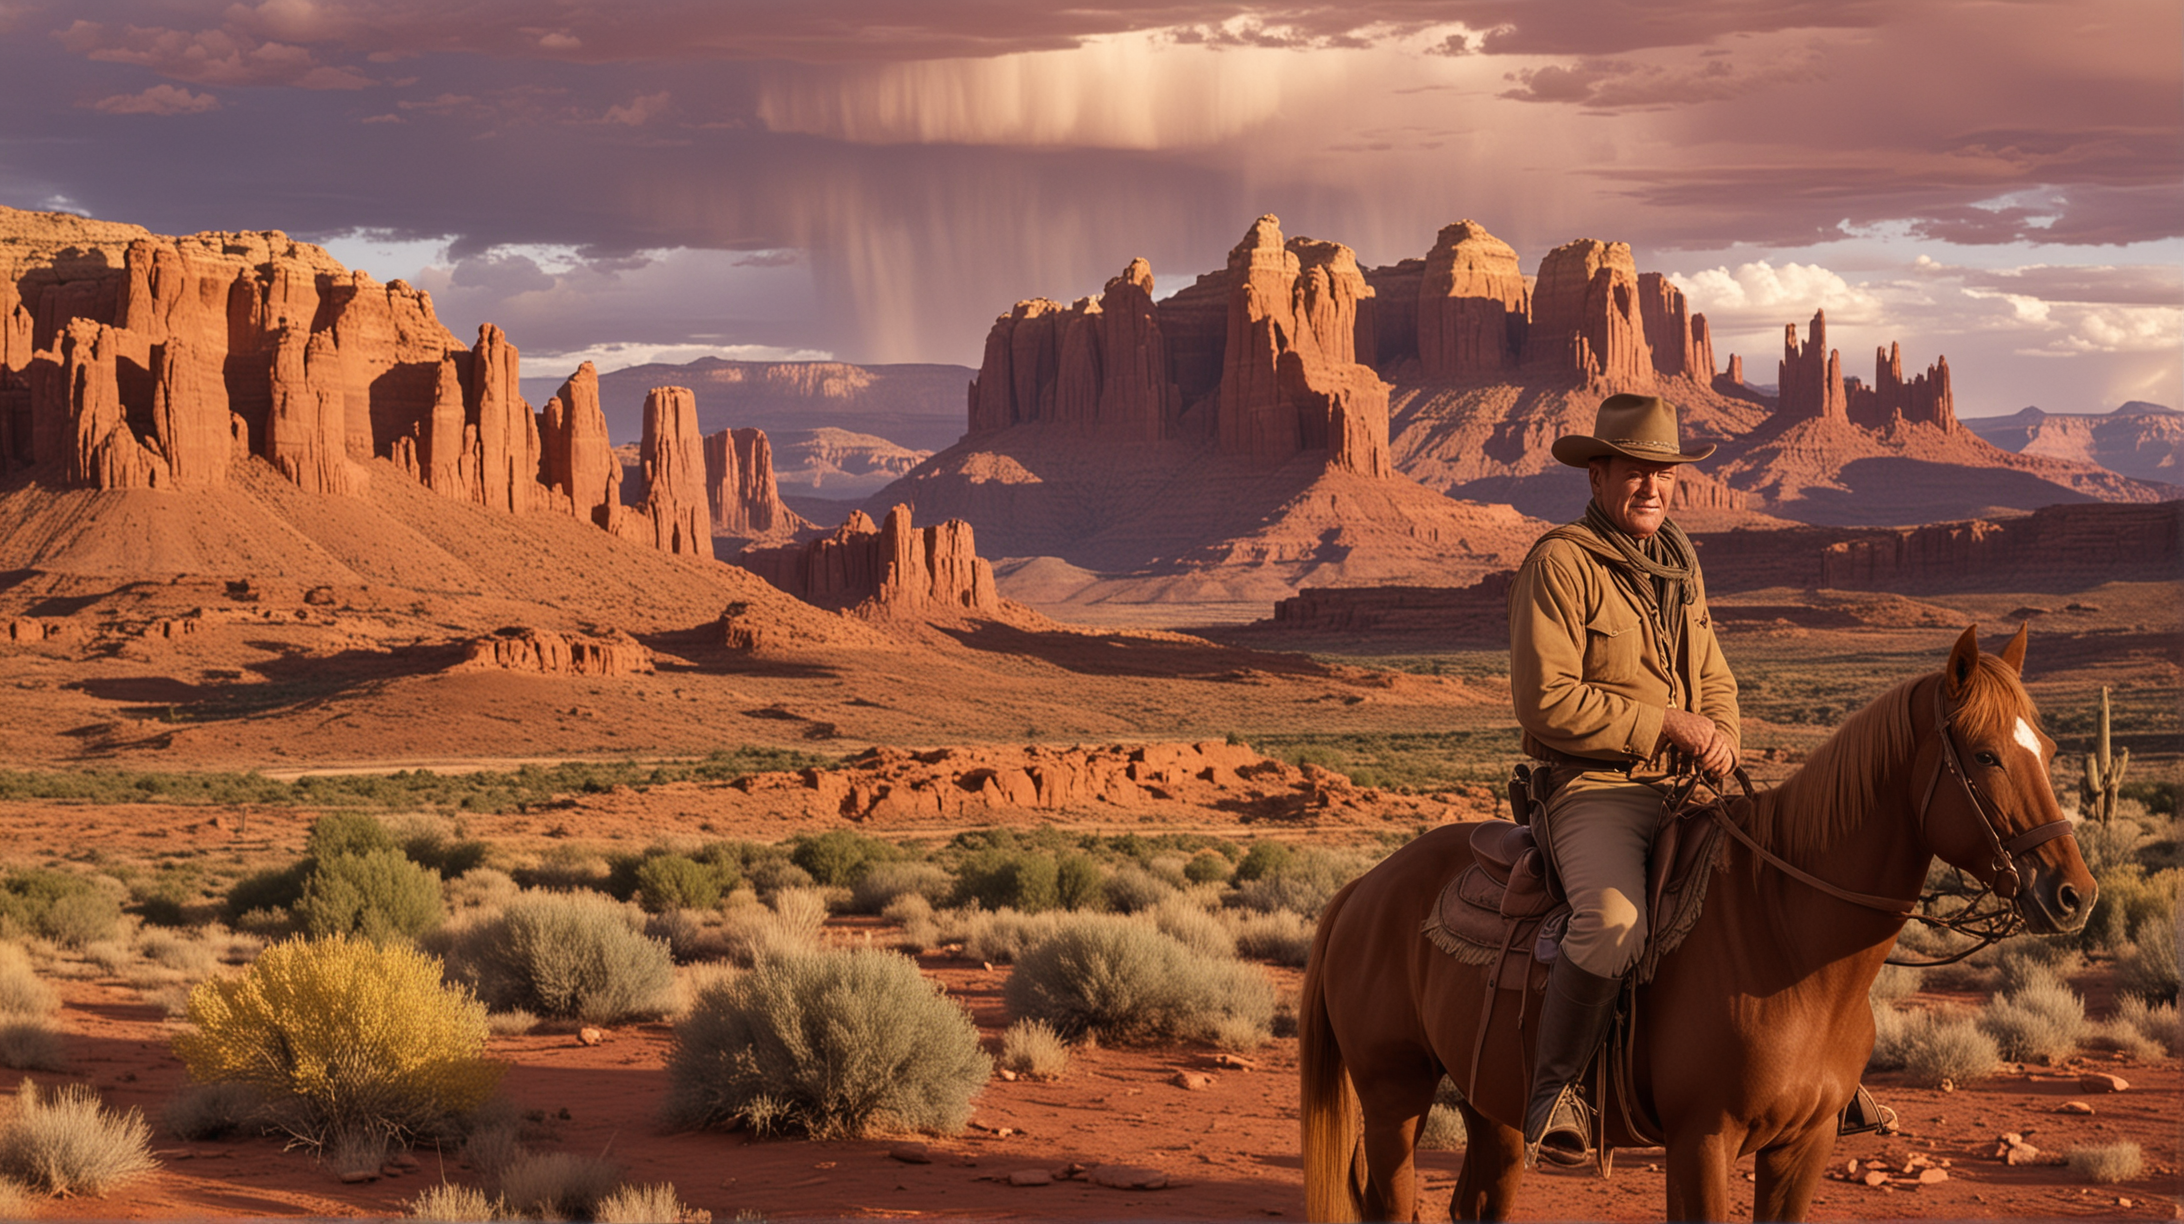 The actor John Wayne is sitting on a horse facing the viewer, Professor Valley near Moab UT, the La Sal Mountains in the distance, red rock mesas and spires of Fisher Towers, movie crew around him., warm evening light, dramatic sky.